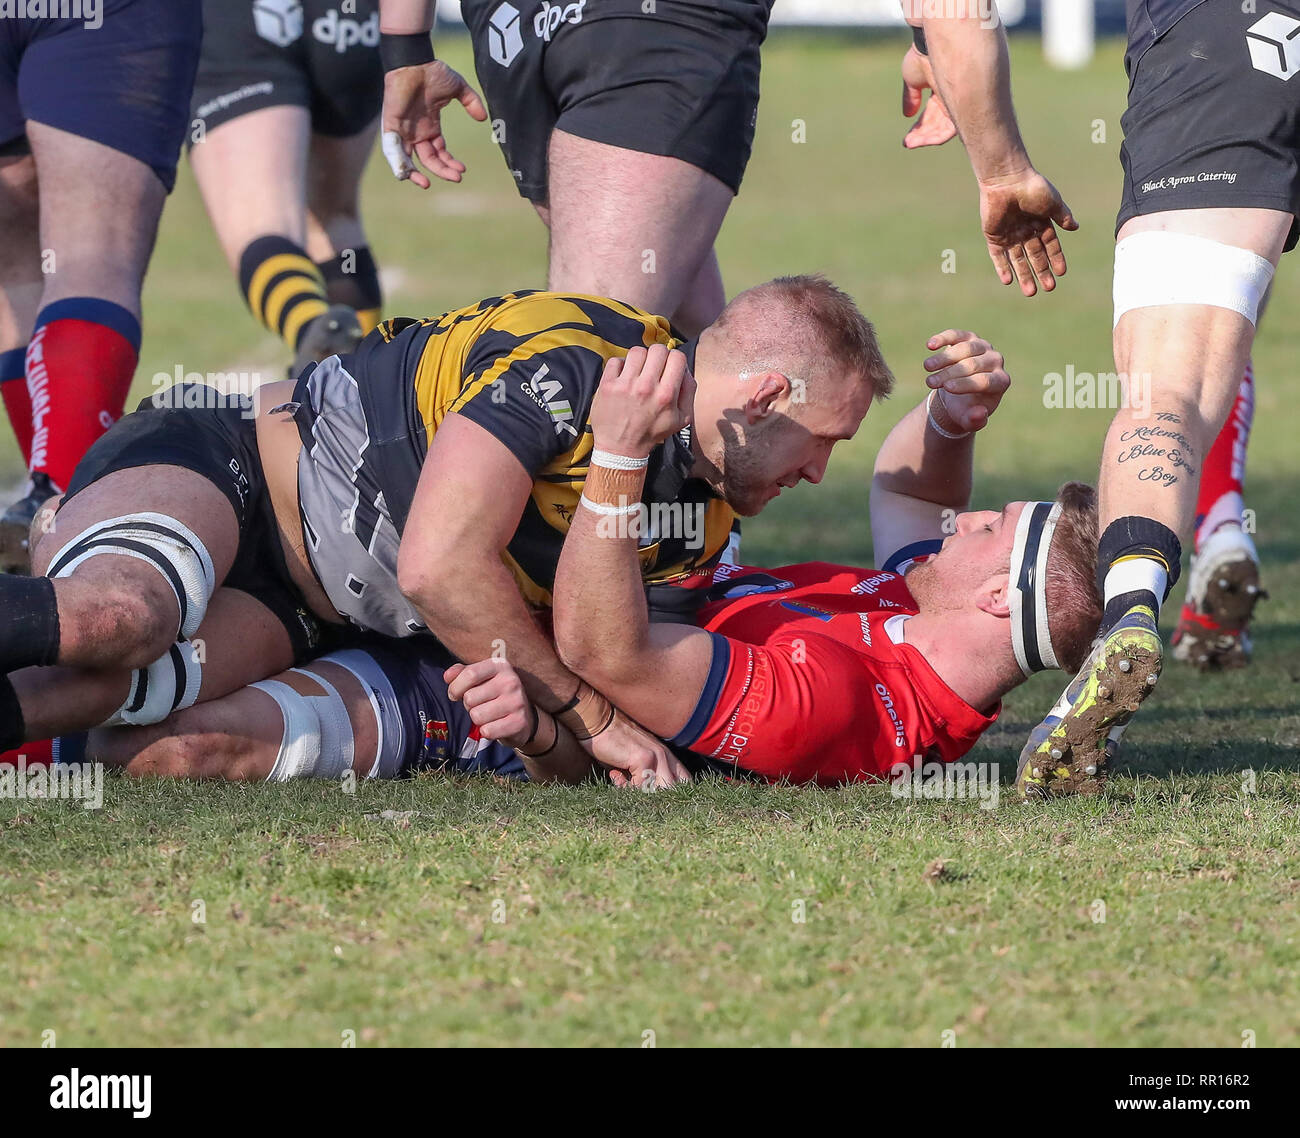 23.02.2019 Hinckley, Leicester, England. Rugby Union, Hinckley rfc v Chester rfc.  Alex Salt of Hinckley gets up close with Rik Cottrell (Chester) dur Stock Photo